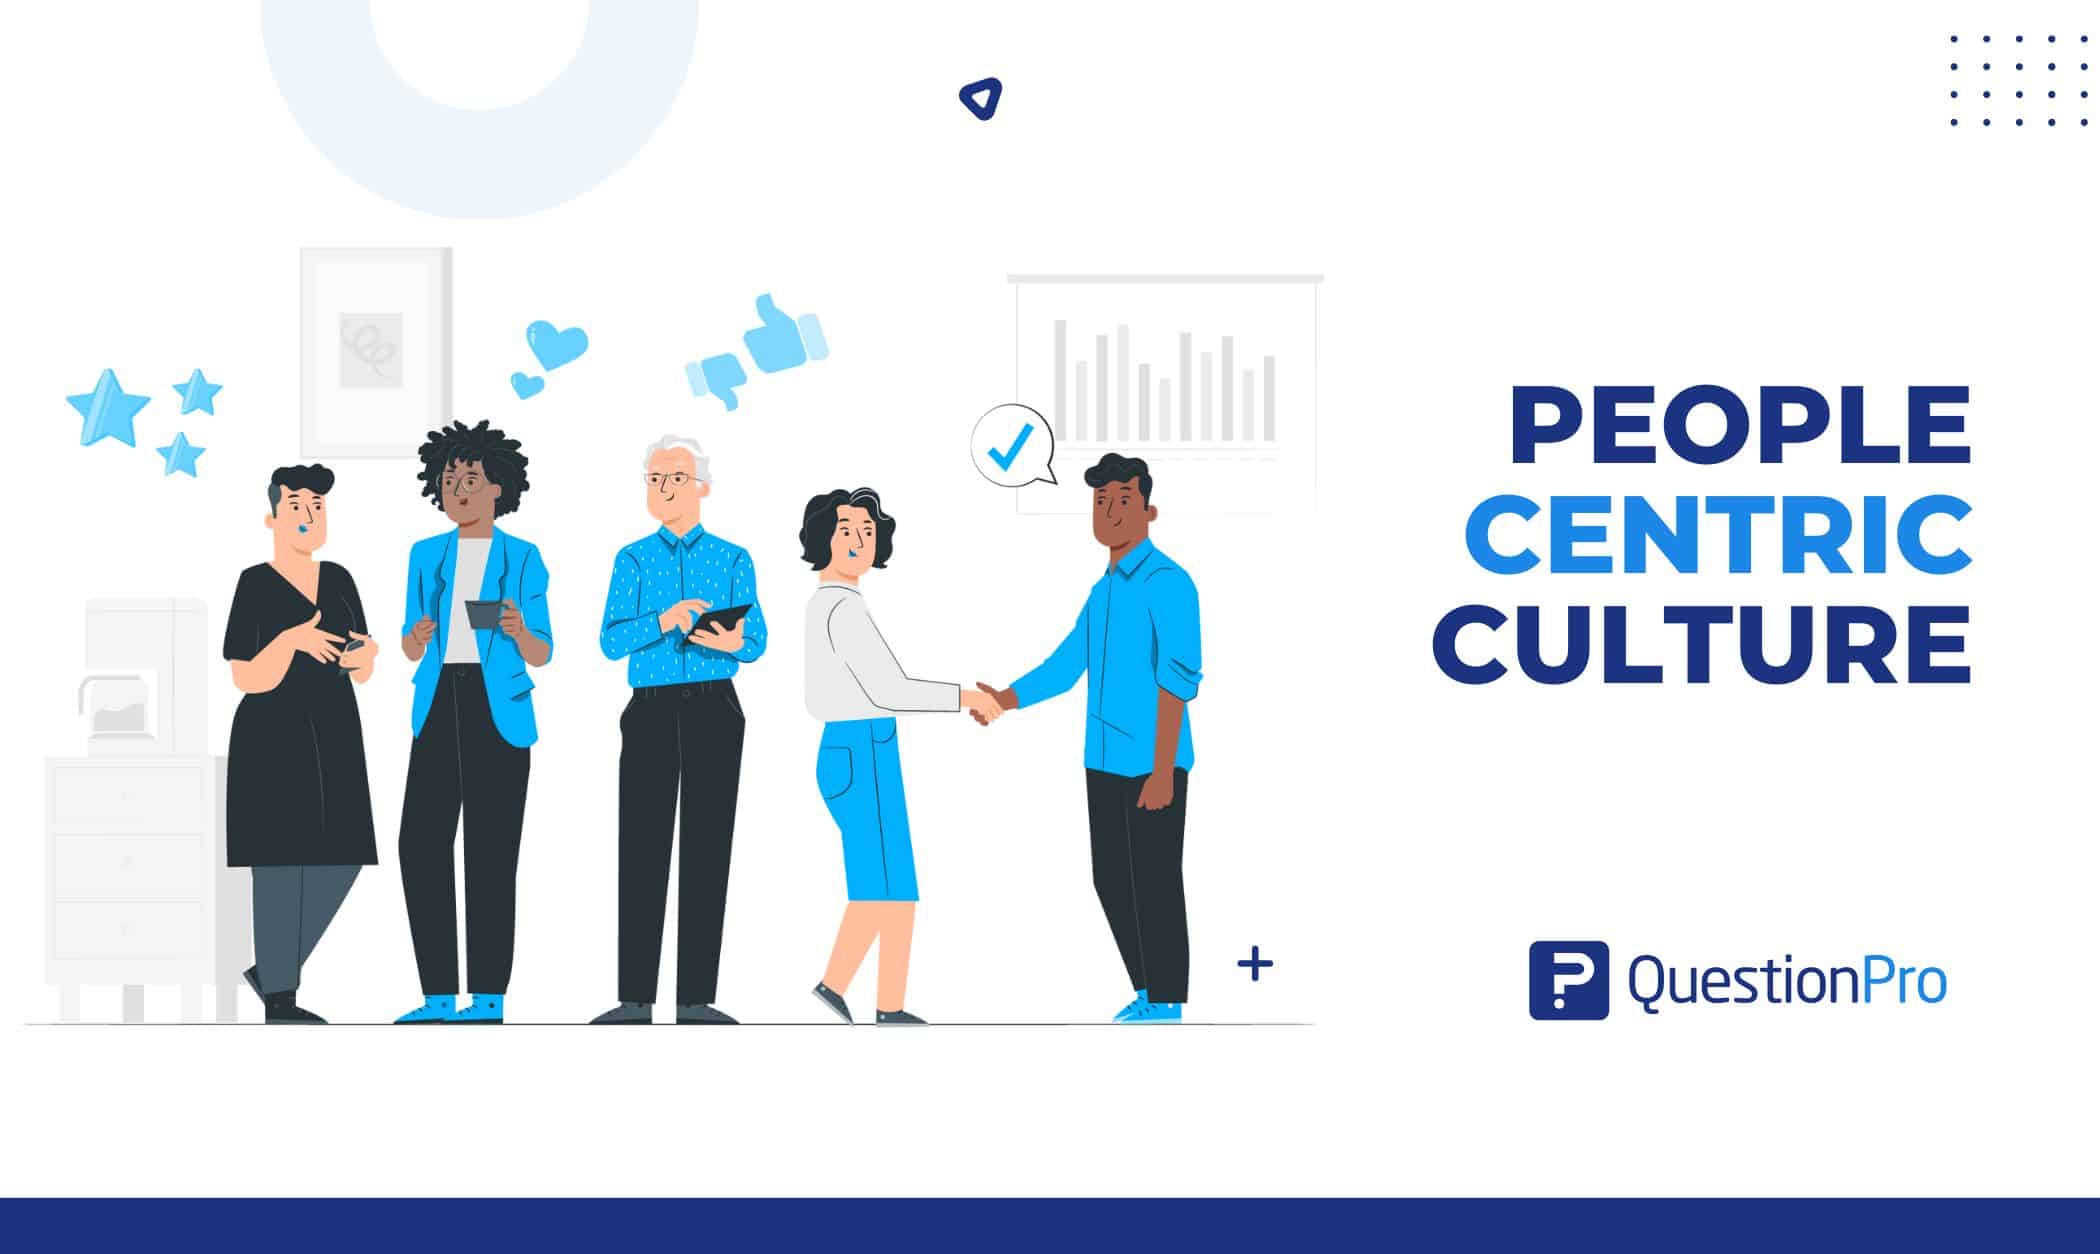 A people centric culture considers how your employees want to work and how to motivate them to perform well. Find out how to make it right.